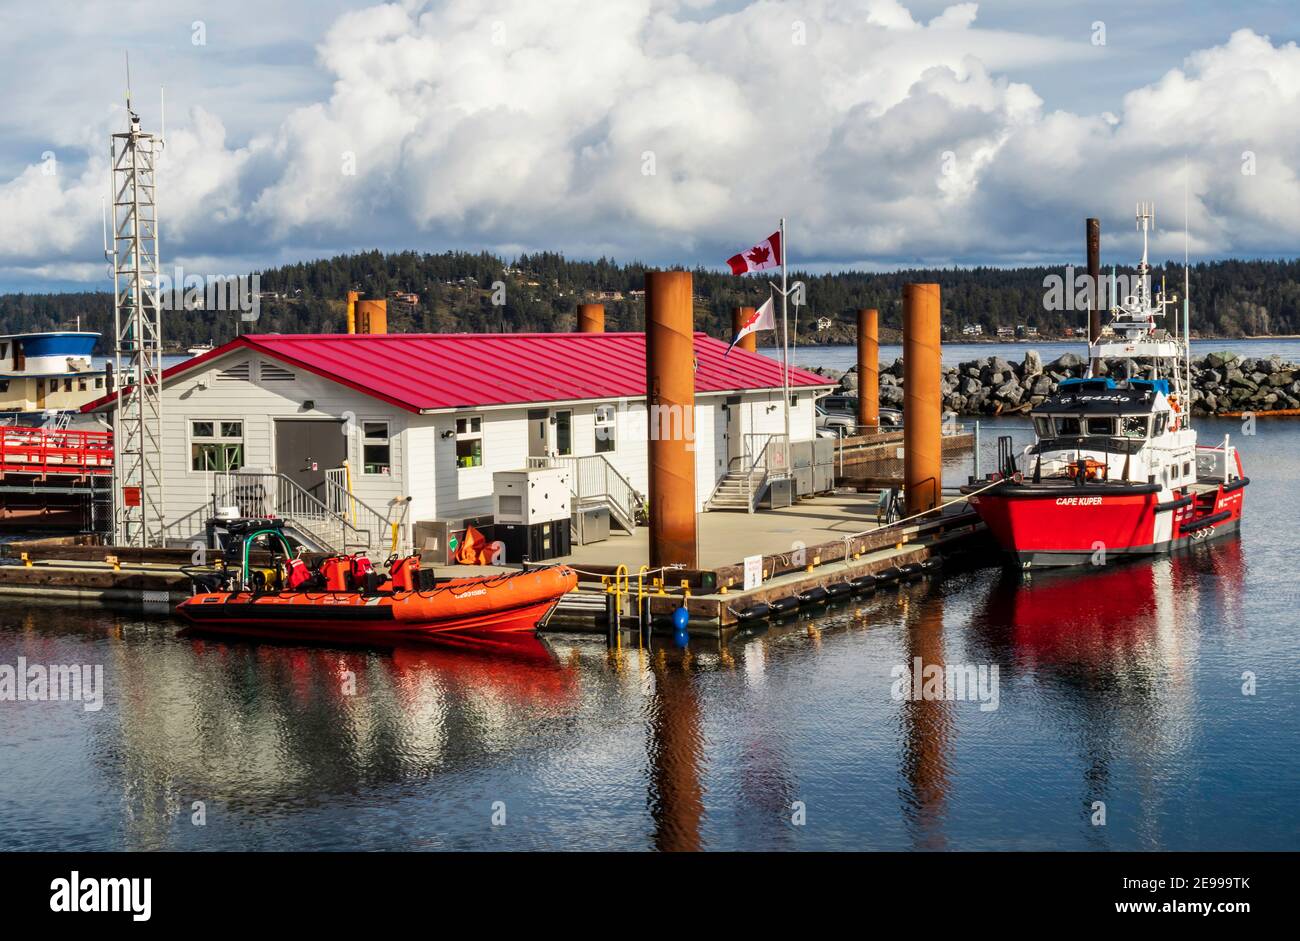 Canadian Coast Guard facility and boats in Campbell River, BC, Canada, a red life boat and a larger rescue ship, red roof on white floating building. Stock Photo